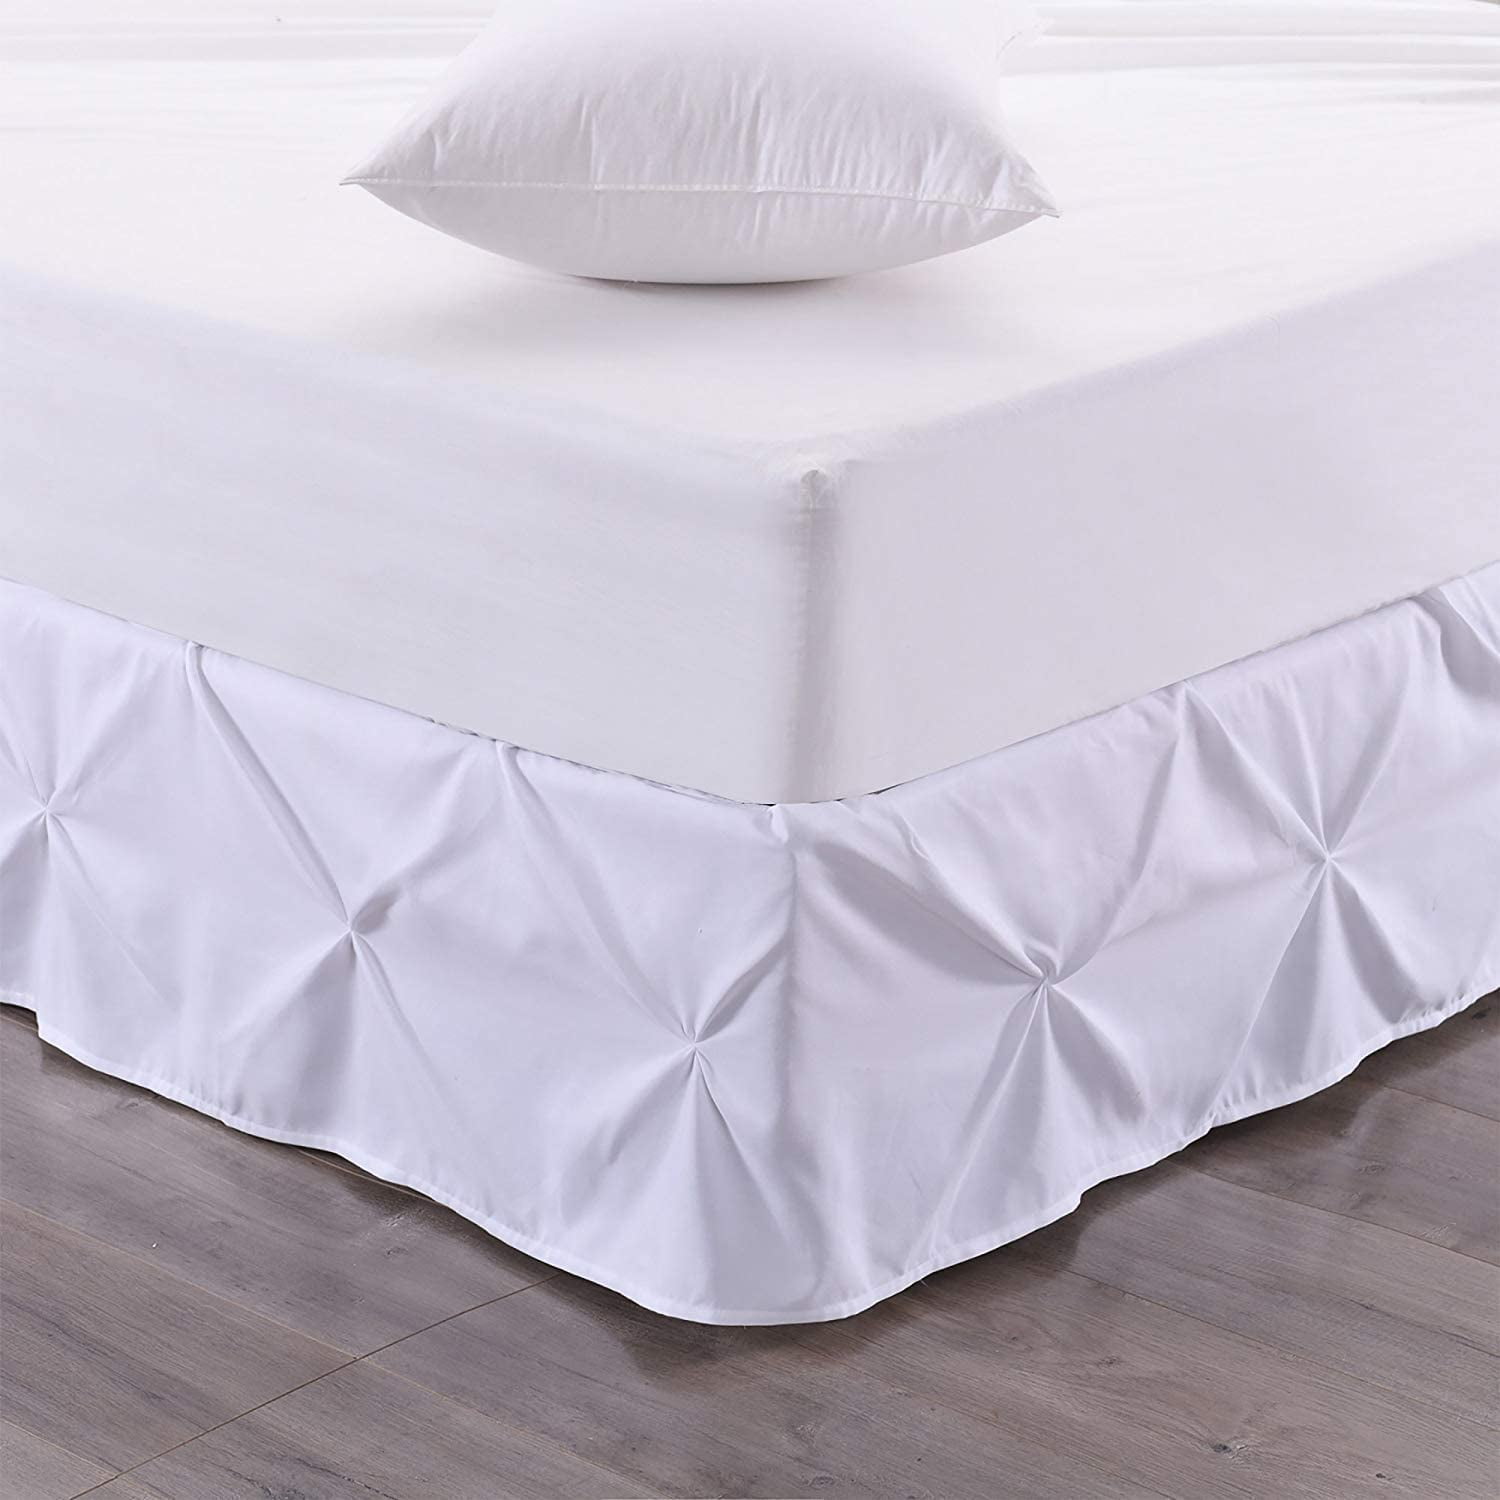 15" Drop Pleated Bed Skirt 800 TC Egyptian Cotton Solid Twin/Full/Queen/King 